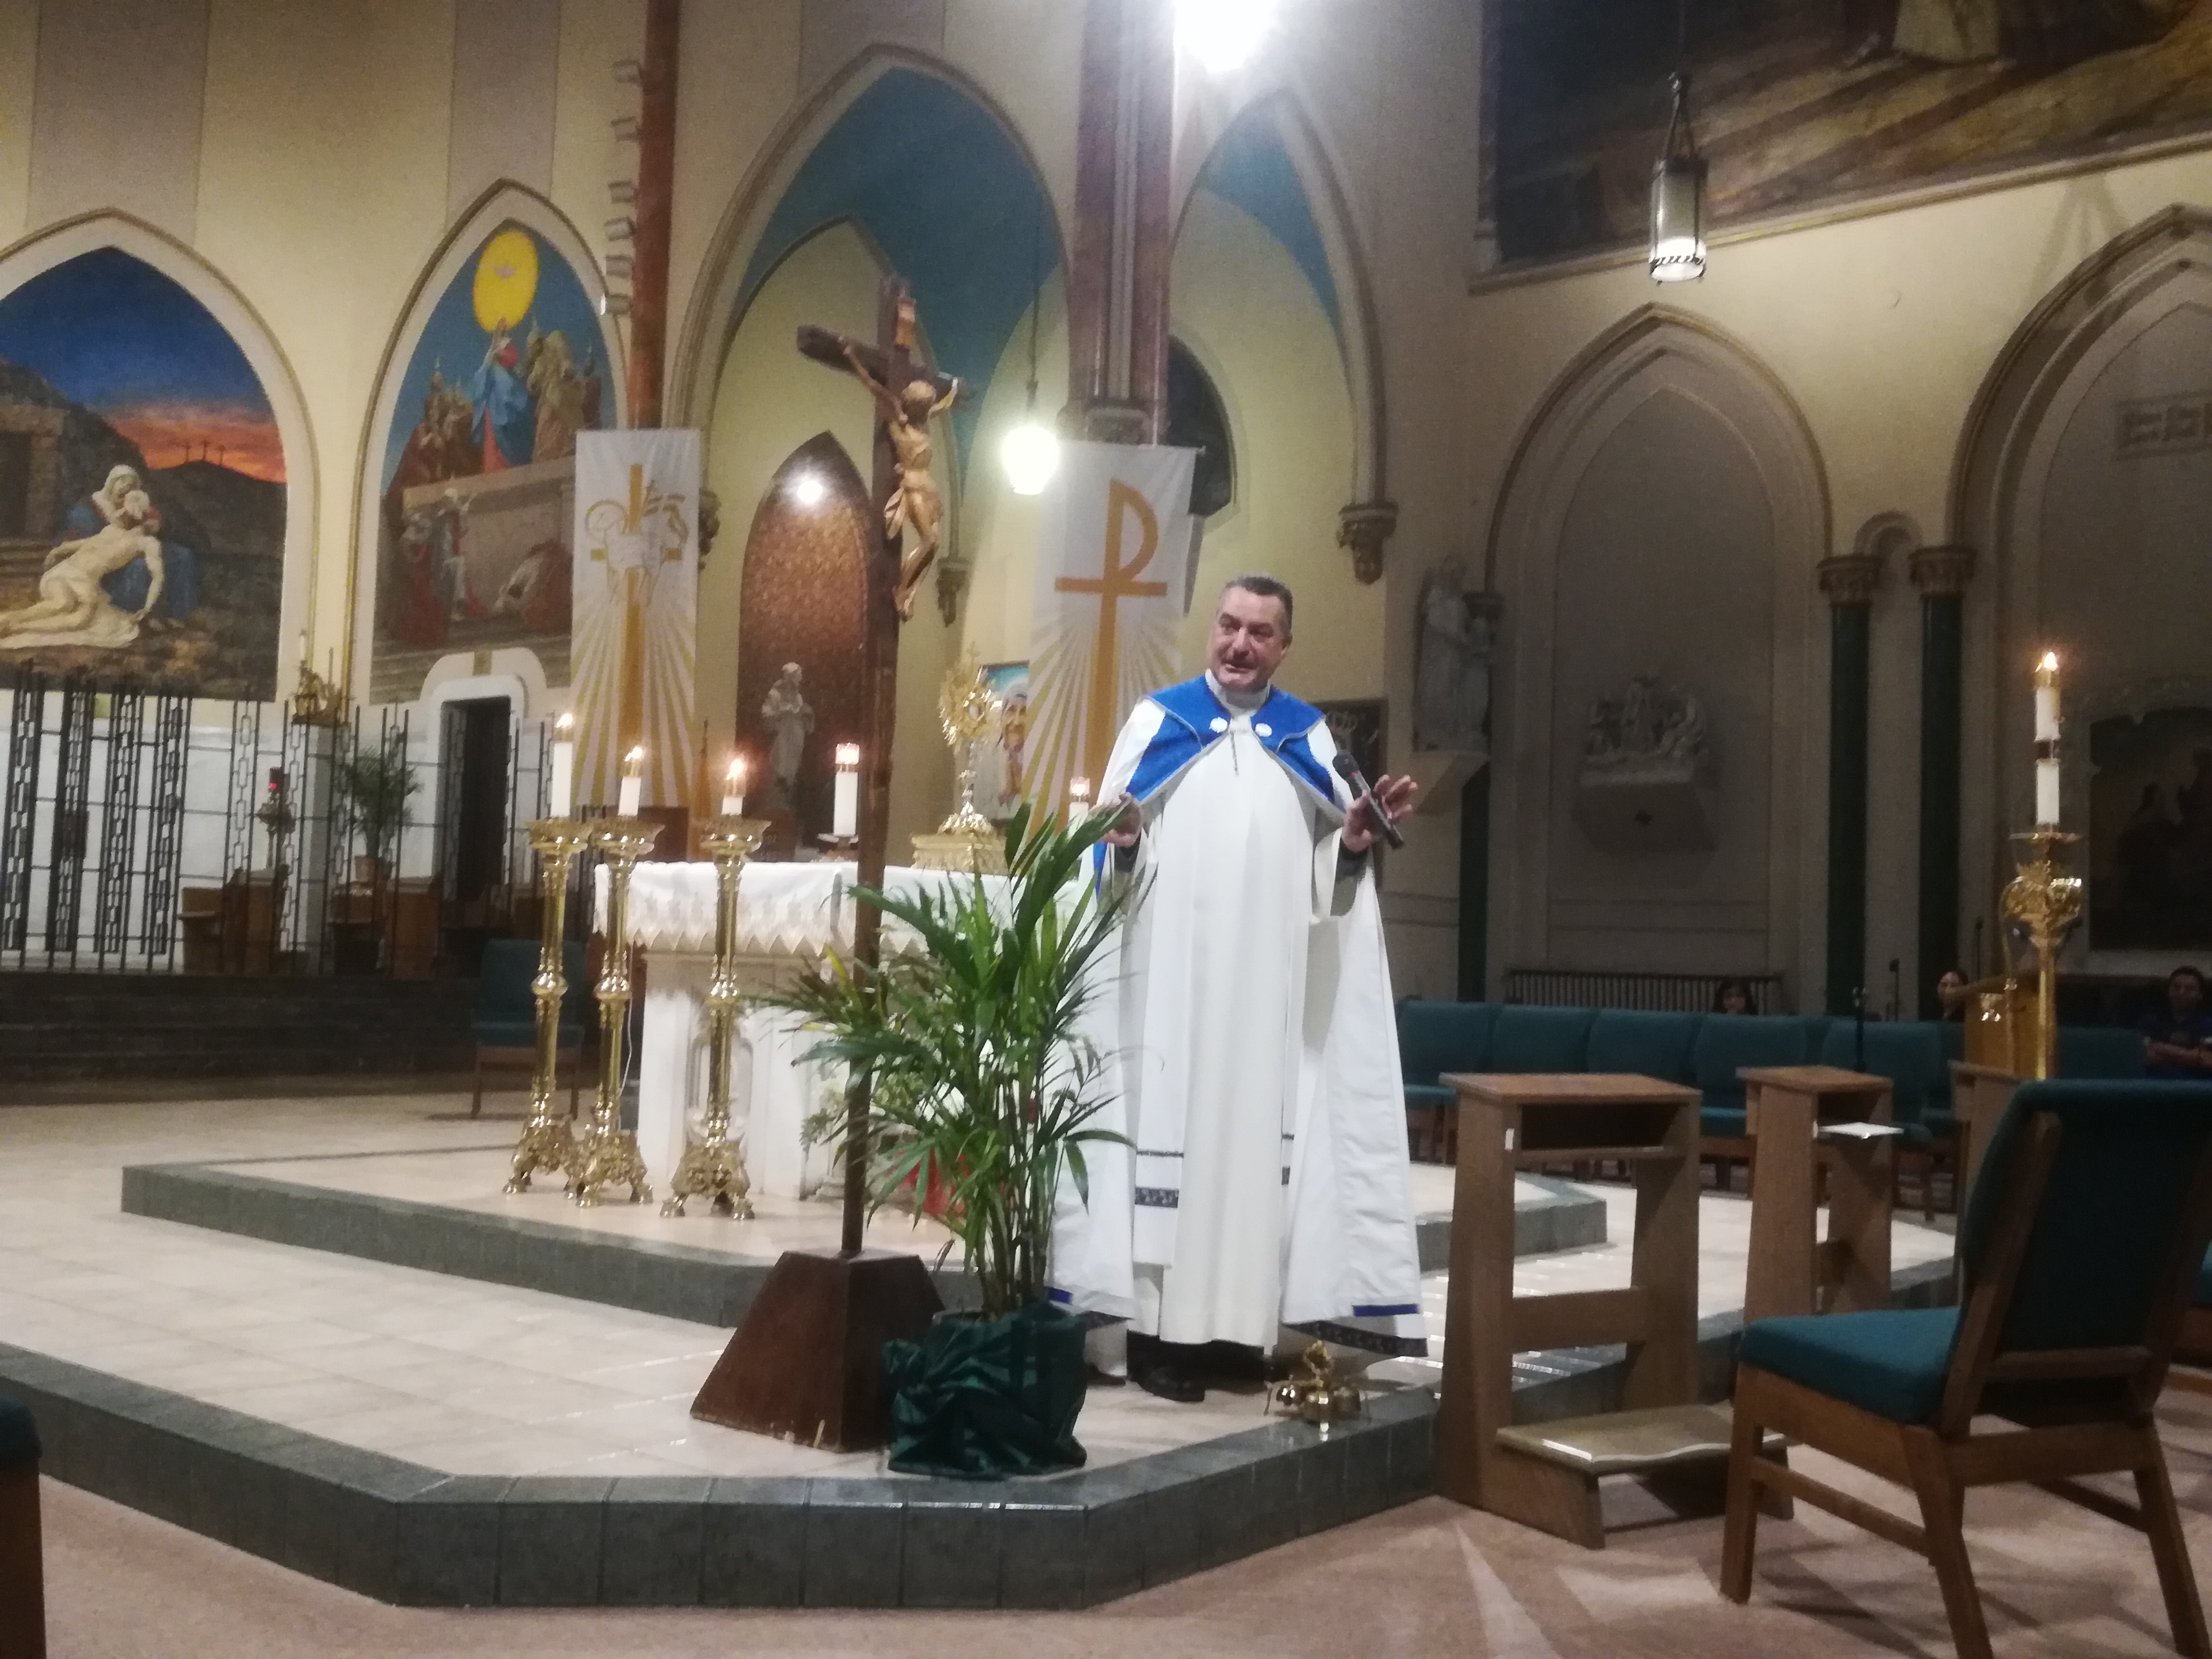 A priest standing in front of the altar.